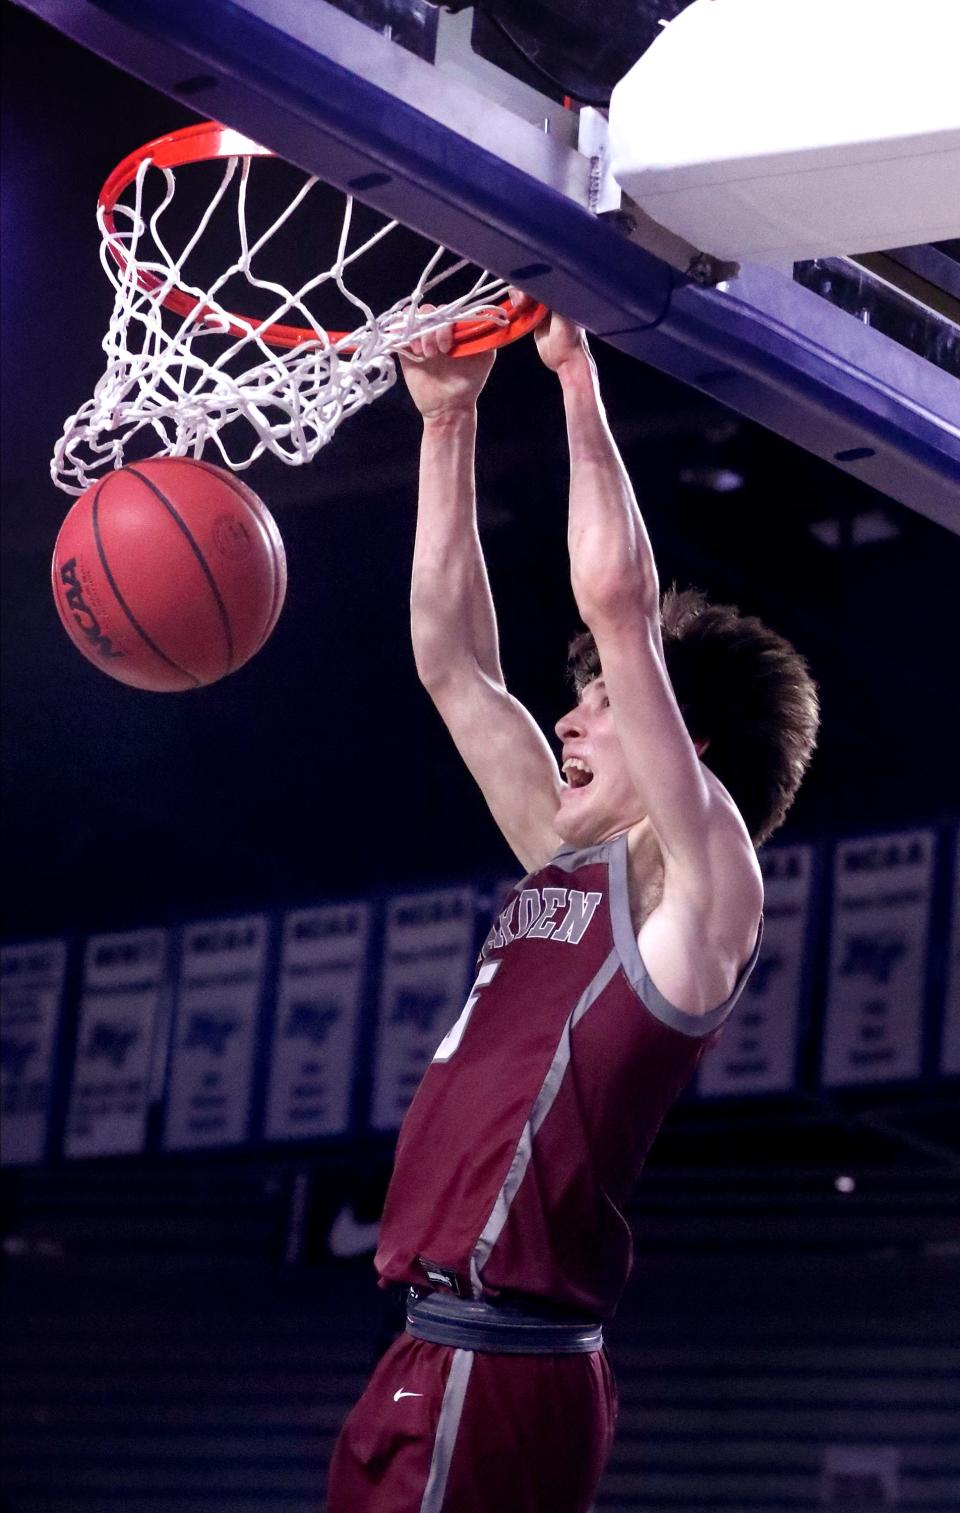 Bearden's Hayden Moseley (5) dunks the ball as they play against Dobyns-Bennett in the 2022 Class 4A TSSAA BlueCross Boys Basketball State Championship, on Saturday, March 19, 2022, at Murphy Center in Murfreesboro, Tenn.  